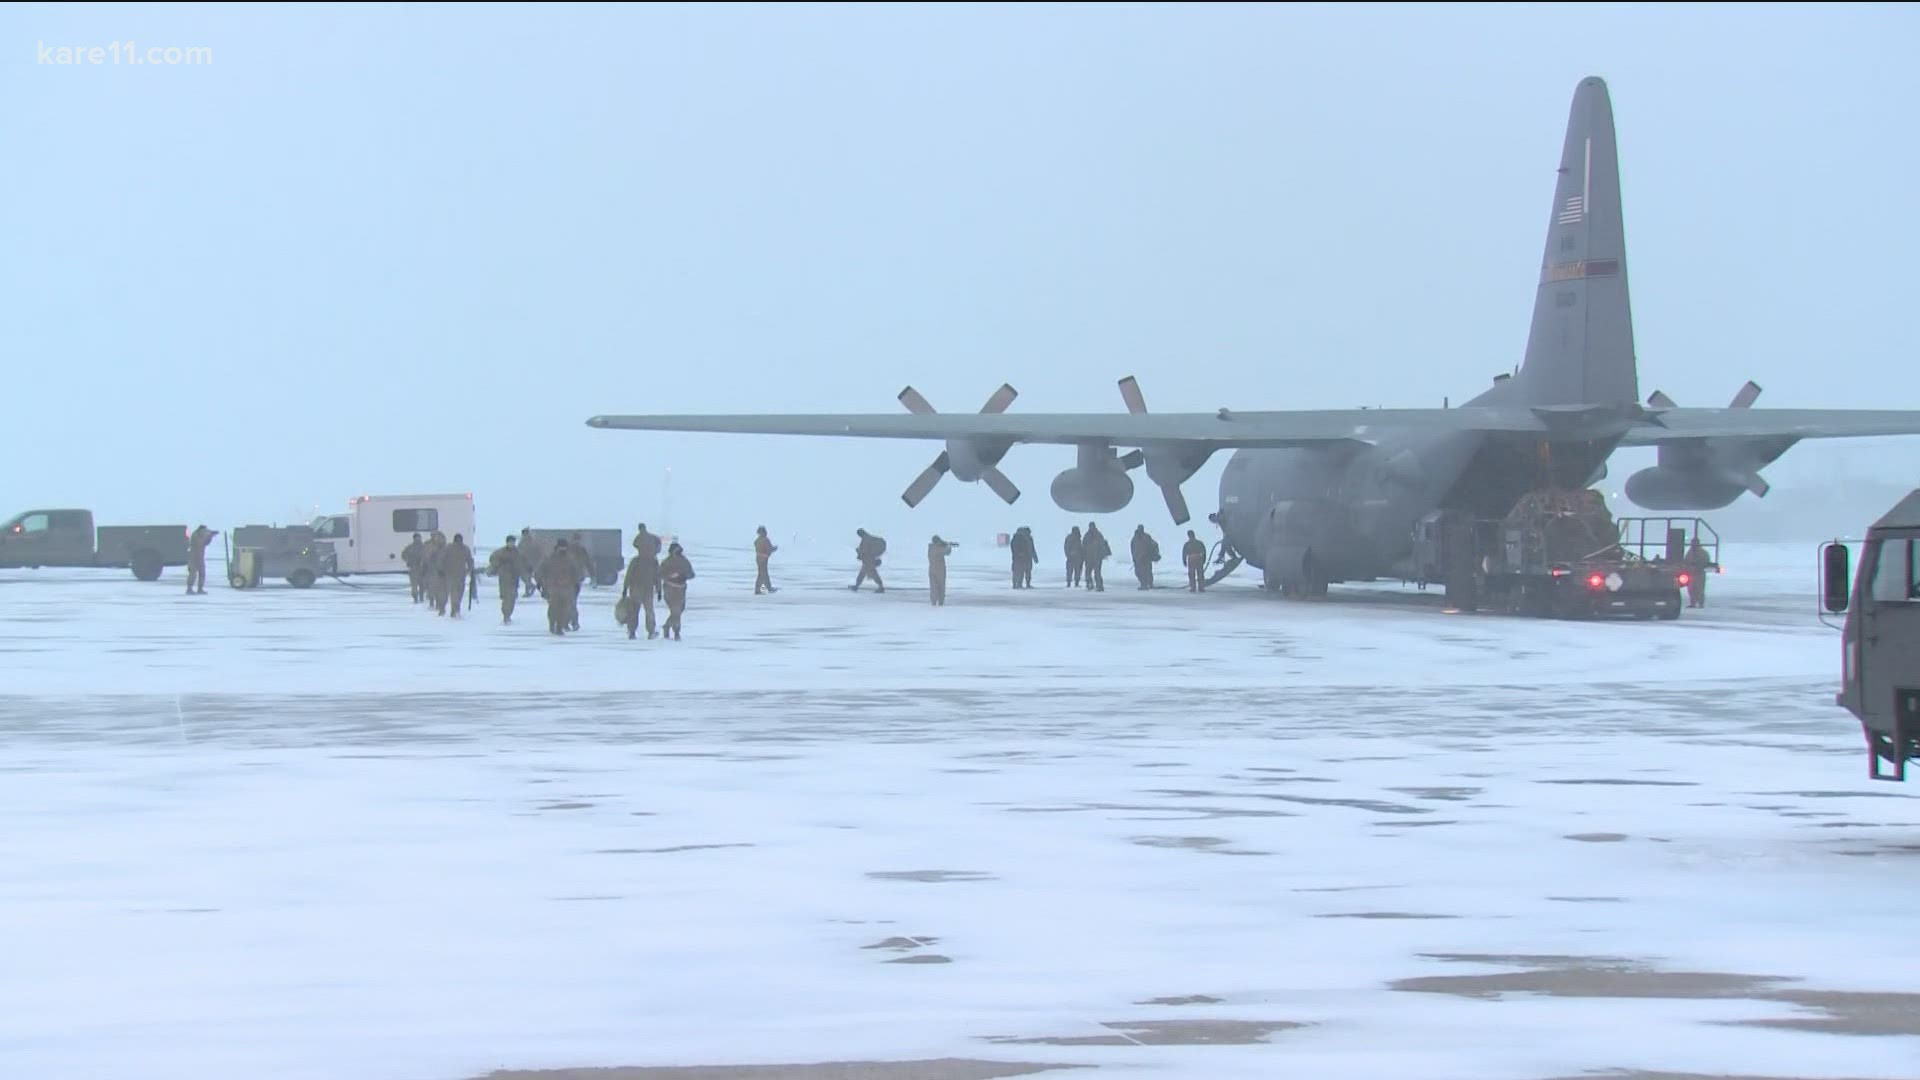 MN National Guard members joined the roughly 25,000 state guardsmen from across the country, sent to safeguard the Presidential Inauguration.